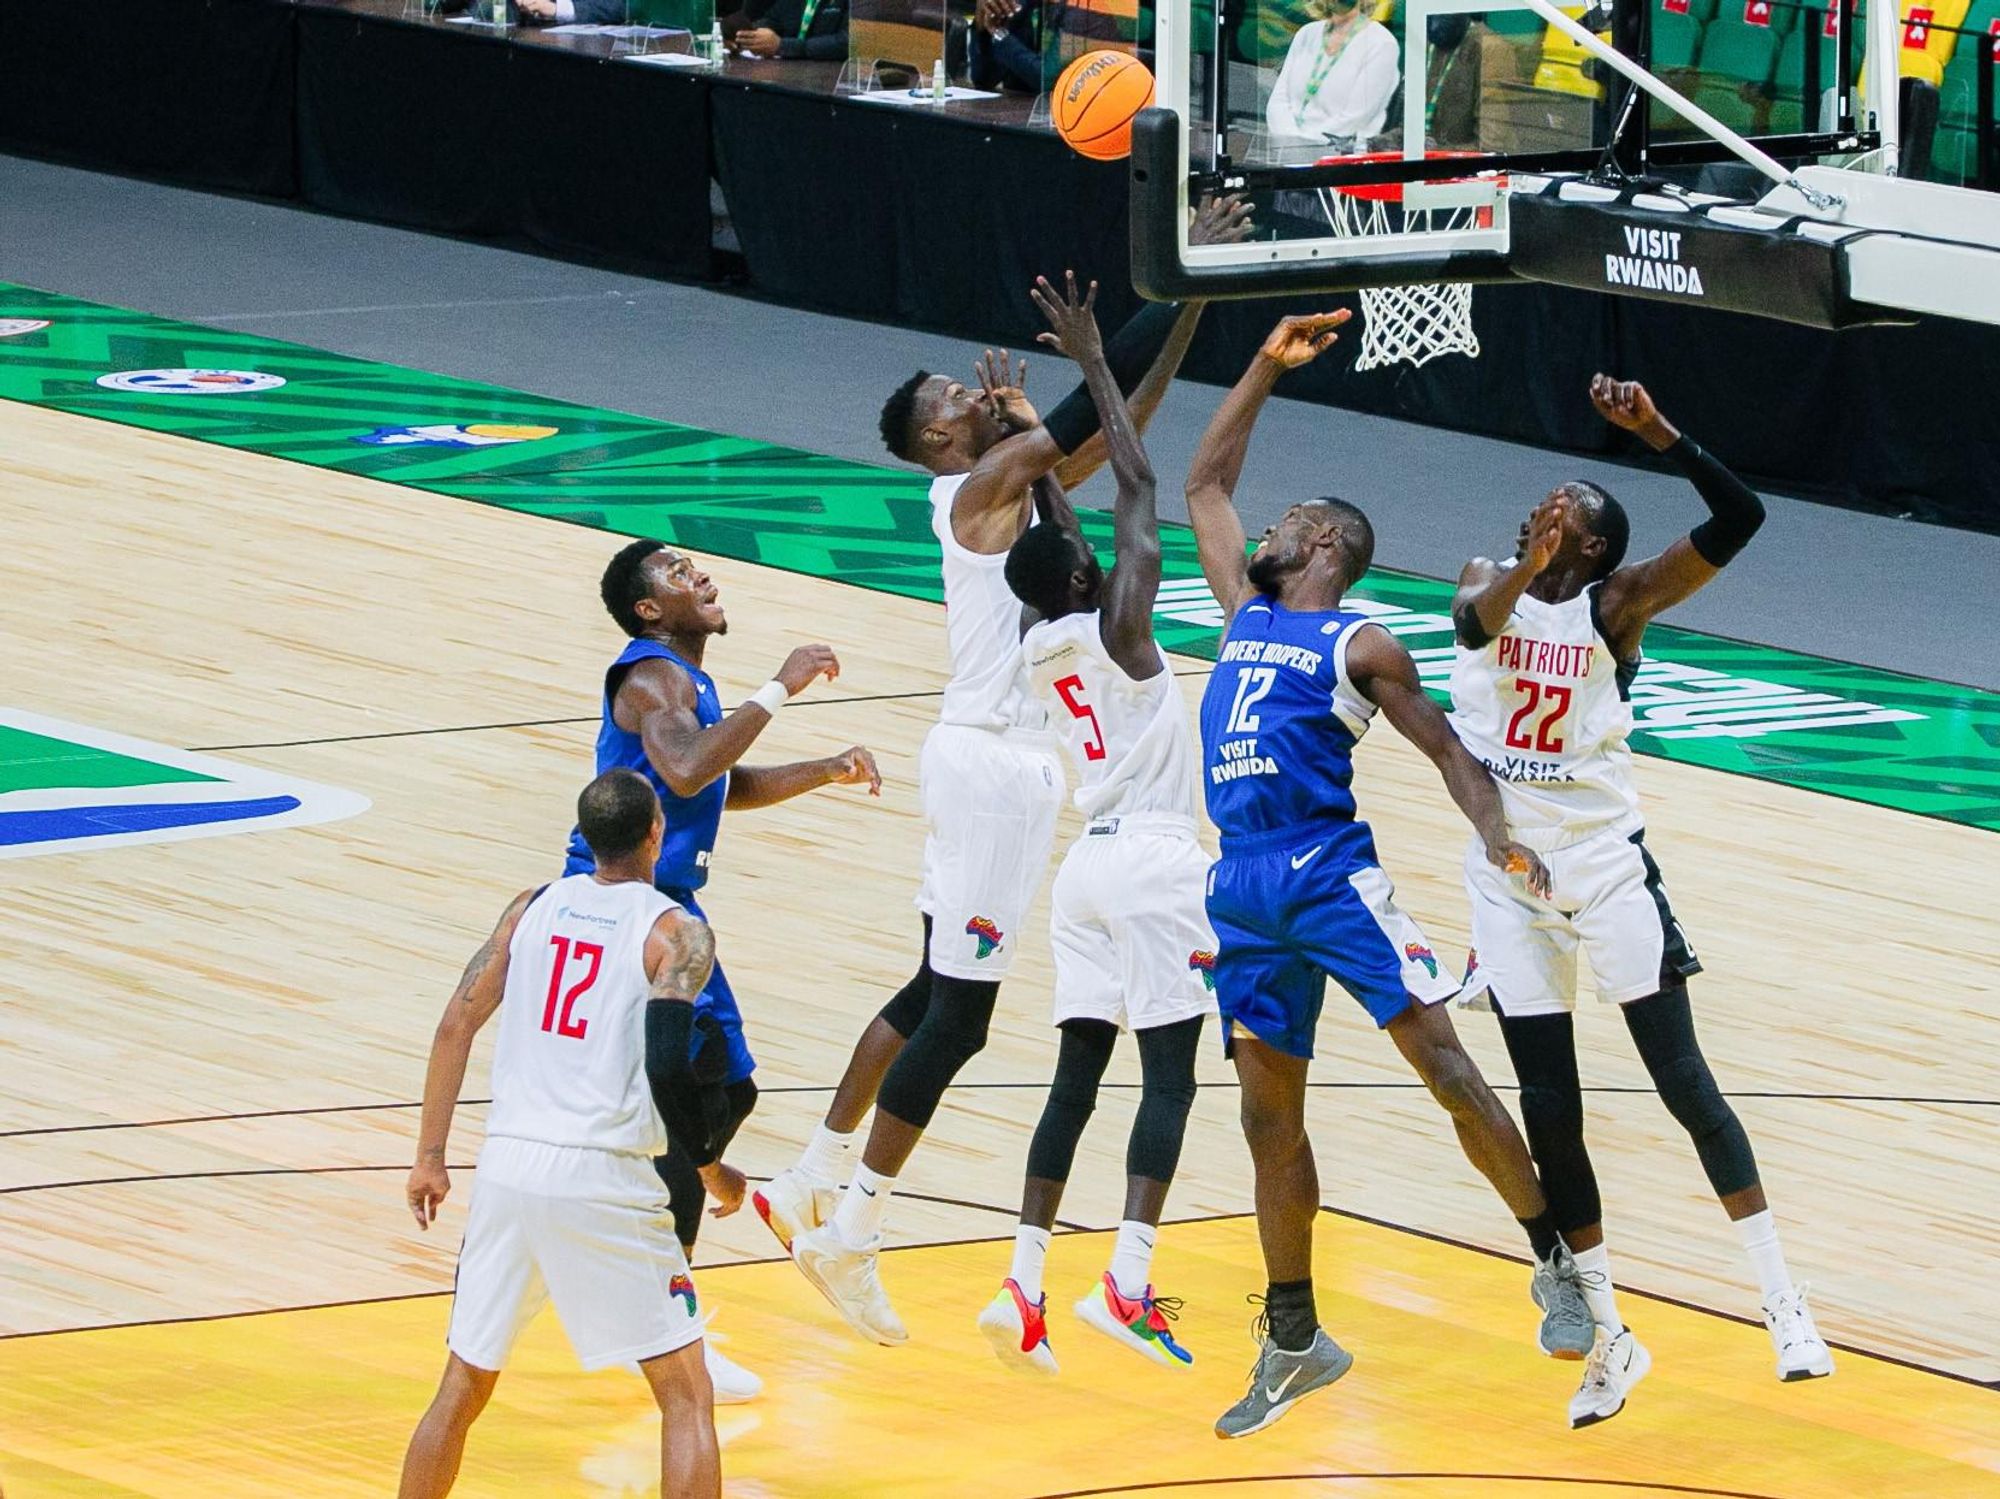 Where To For African Basketball?